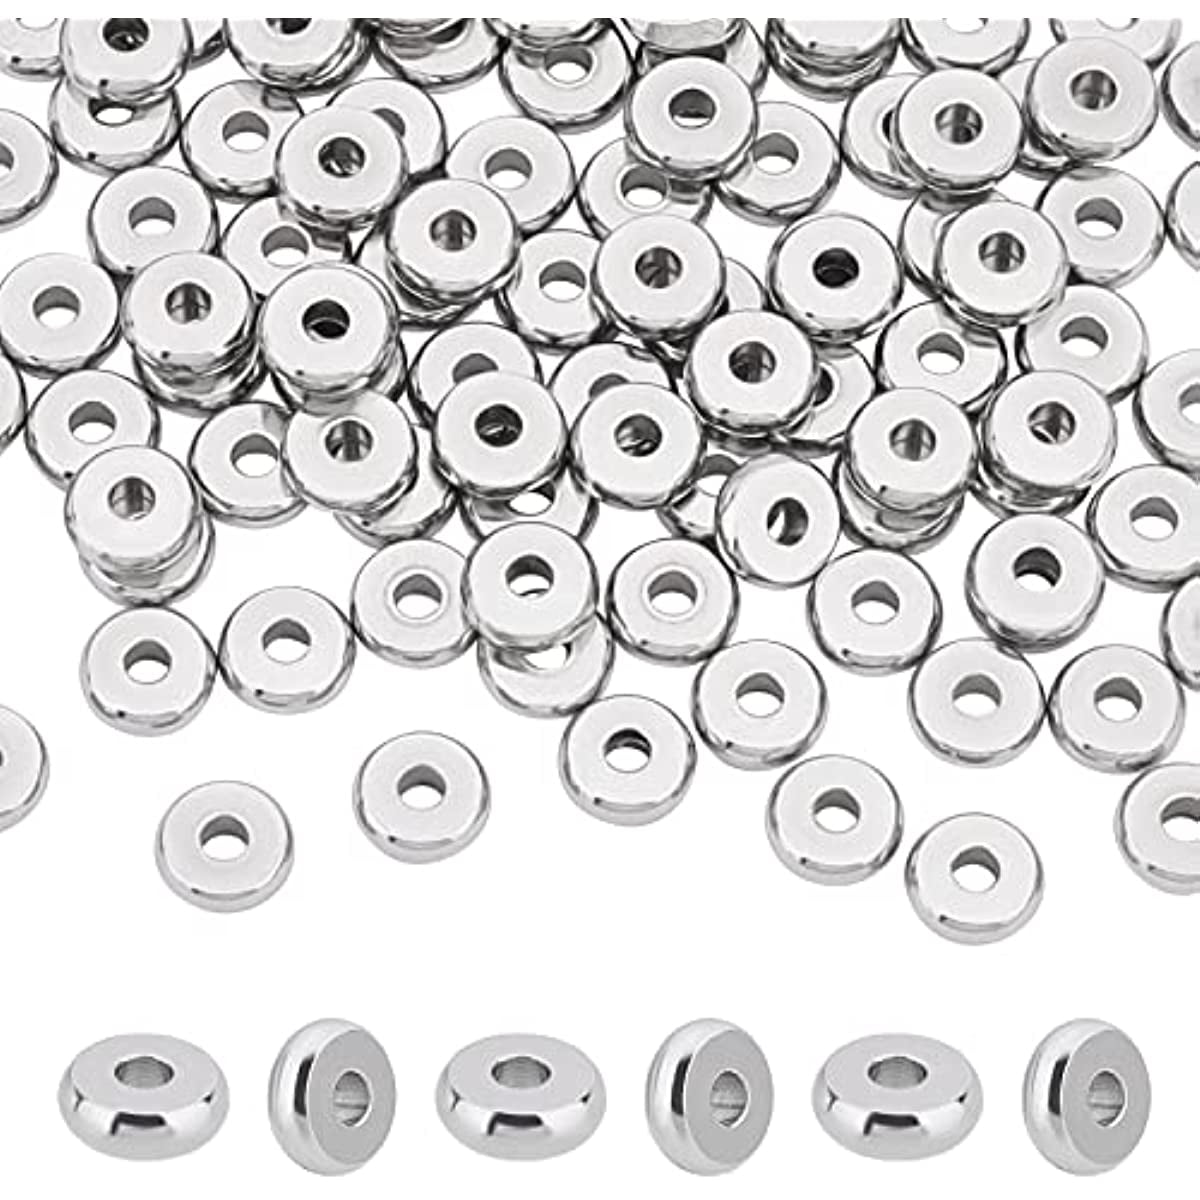  20pcs Large Pore Beads Spacer Beads Metal Round Beads rondelle  Loose Beads DIY Jewelry findings Jewelry Making Supplies Beads for  Bracelets Making Inlaid Beads Copper Beads Alloy : Arts, Crafts 